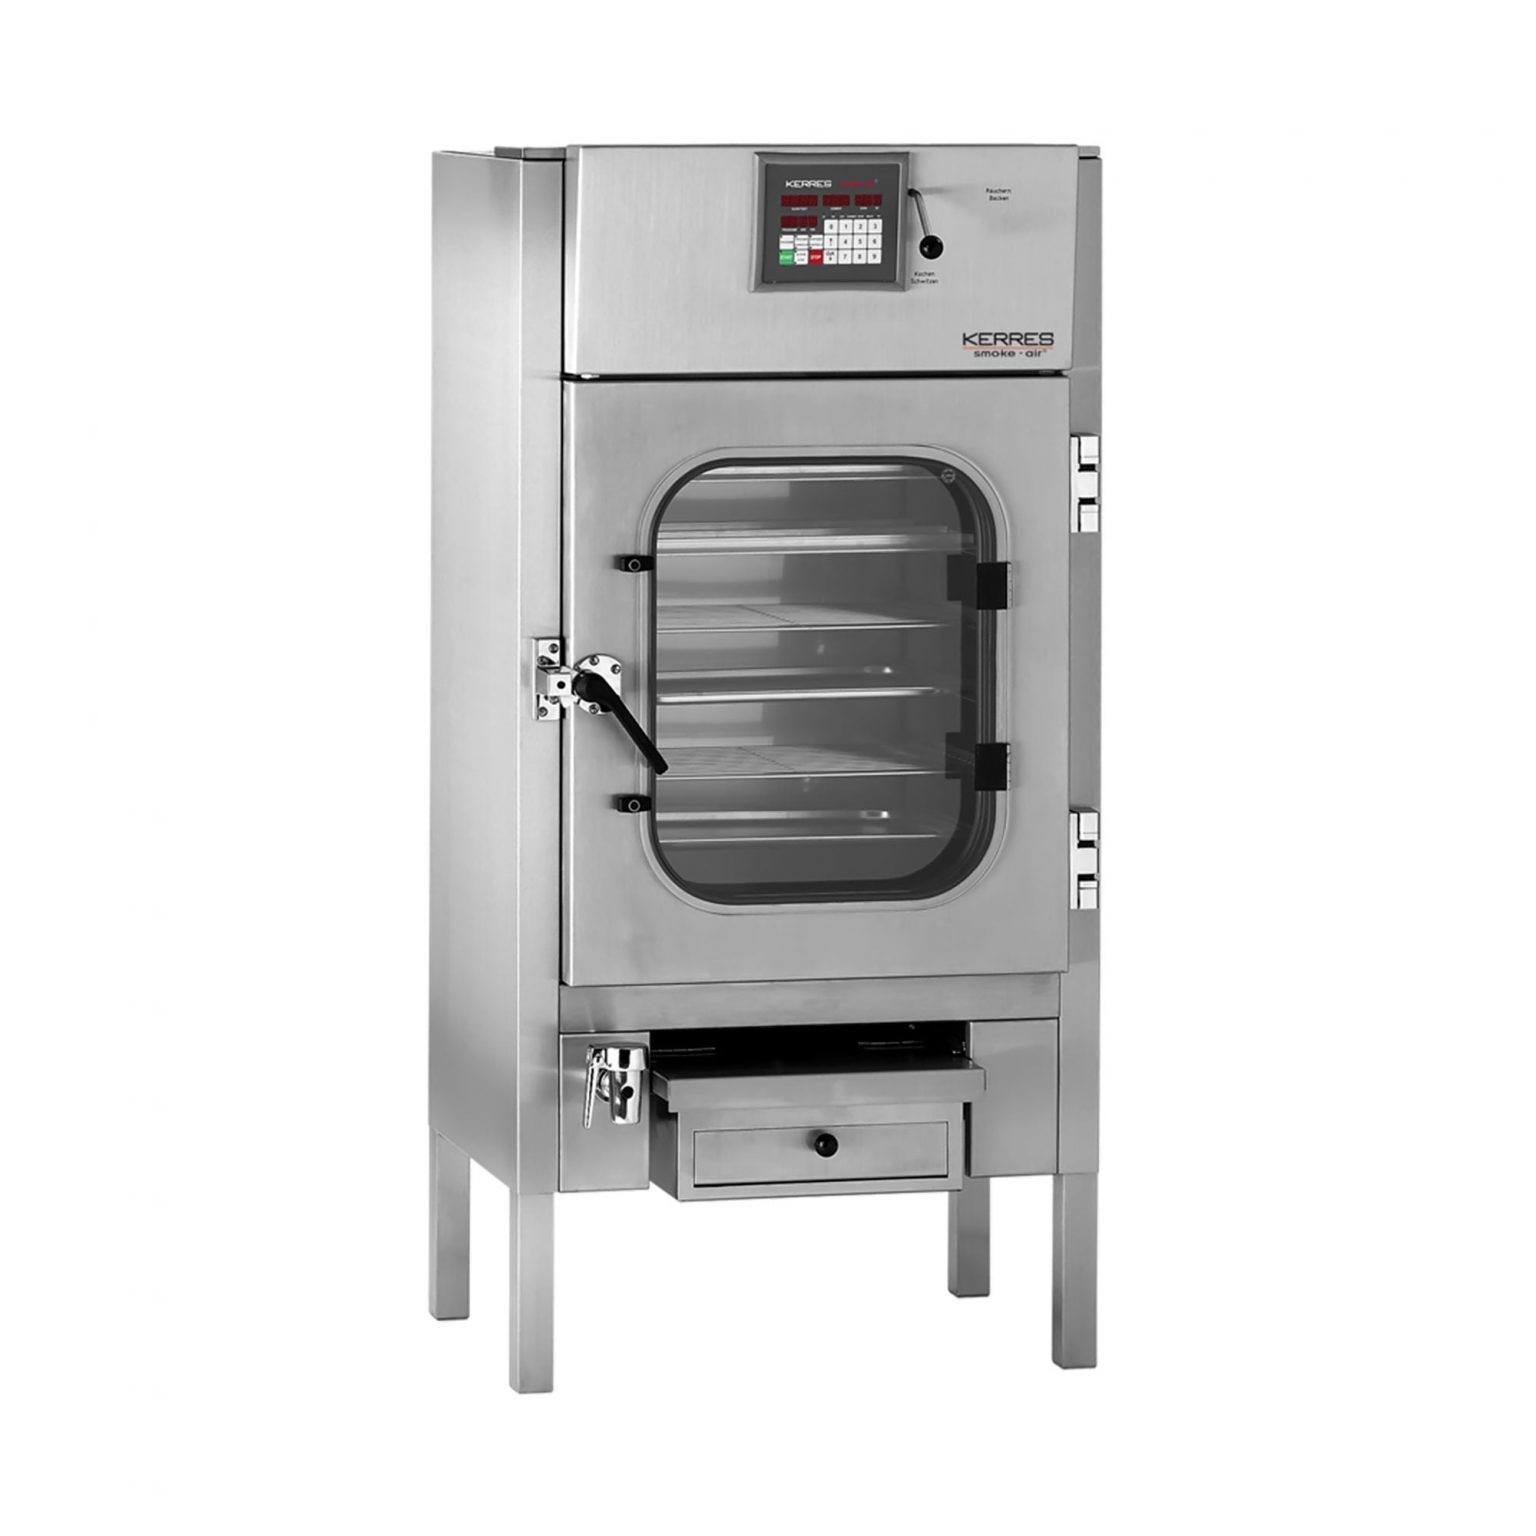 defufumadora-e-fogao-combo-oven-cs-350-smoking-roasting-and-steam-cooker-isolutions-portugal